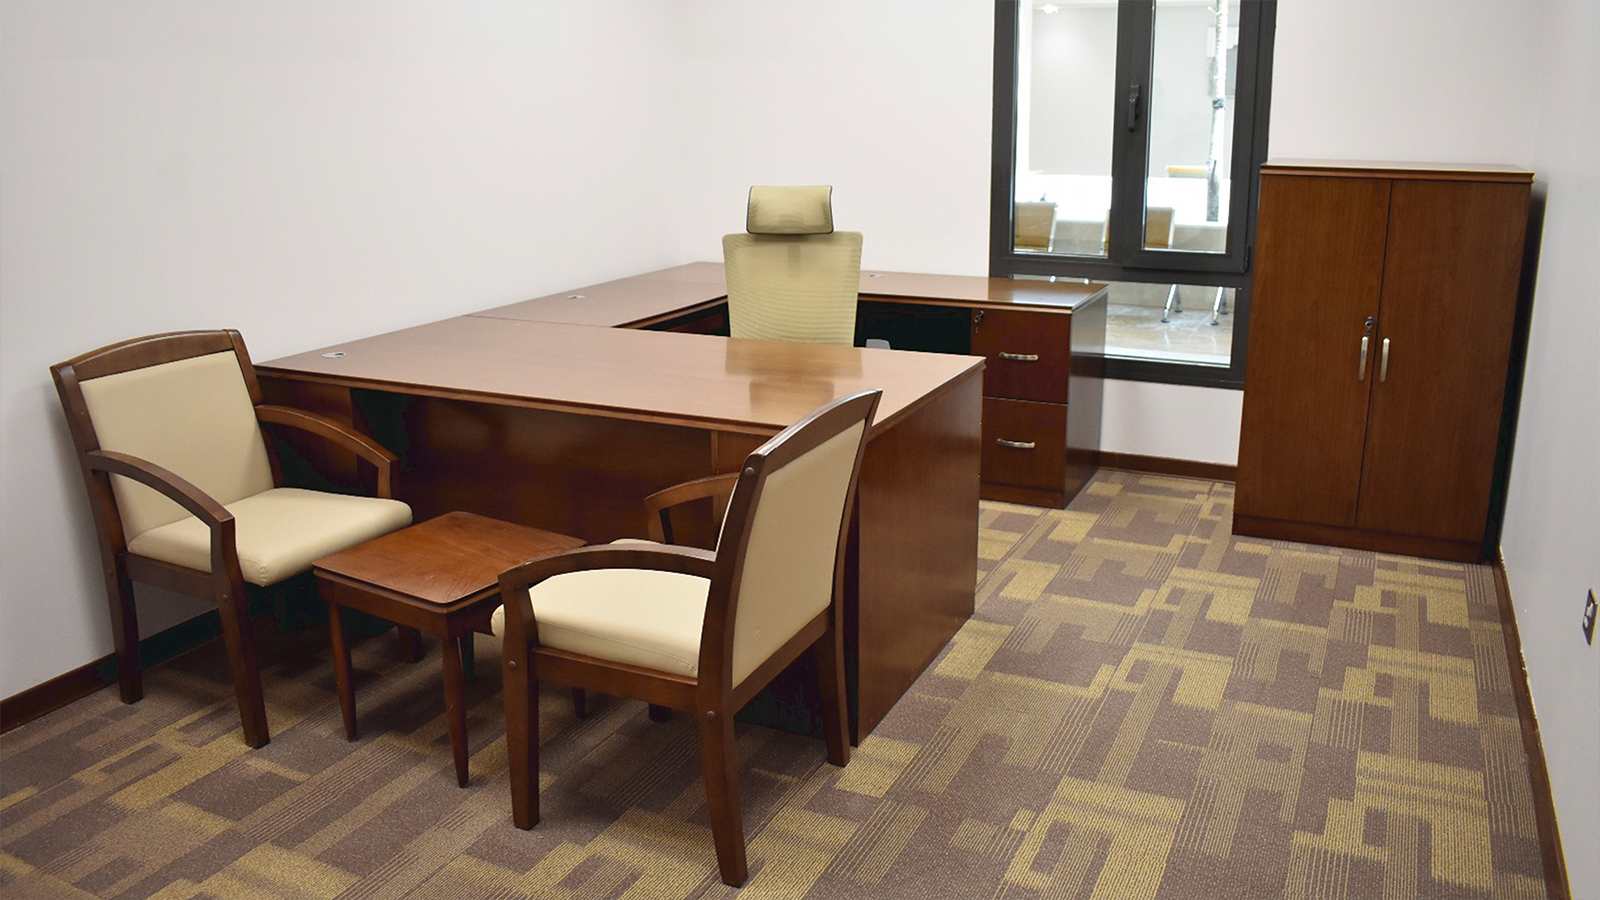 The Unmatched Advantages of Customized Furniture: Tailored Solutions for Ideal Office Spaces in the Middle East